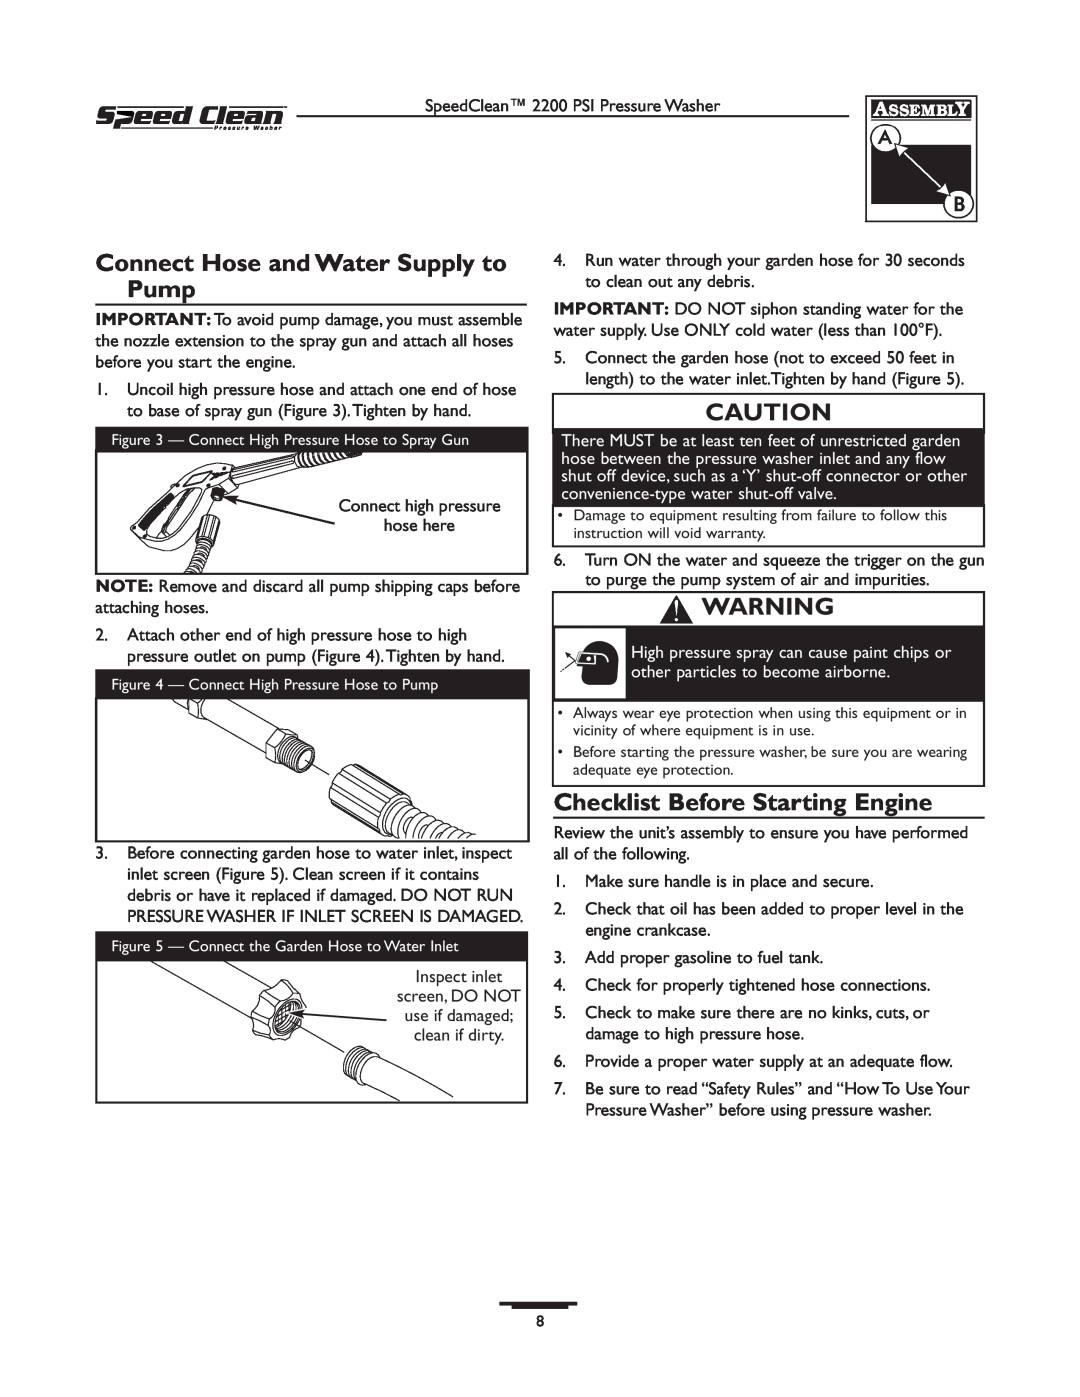 Briggs & Stratton 020239-0 owner manual Connect Hose and Water Supply to Pump, Checklist Before Starting Engine 